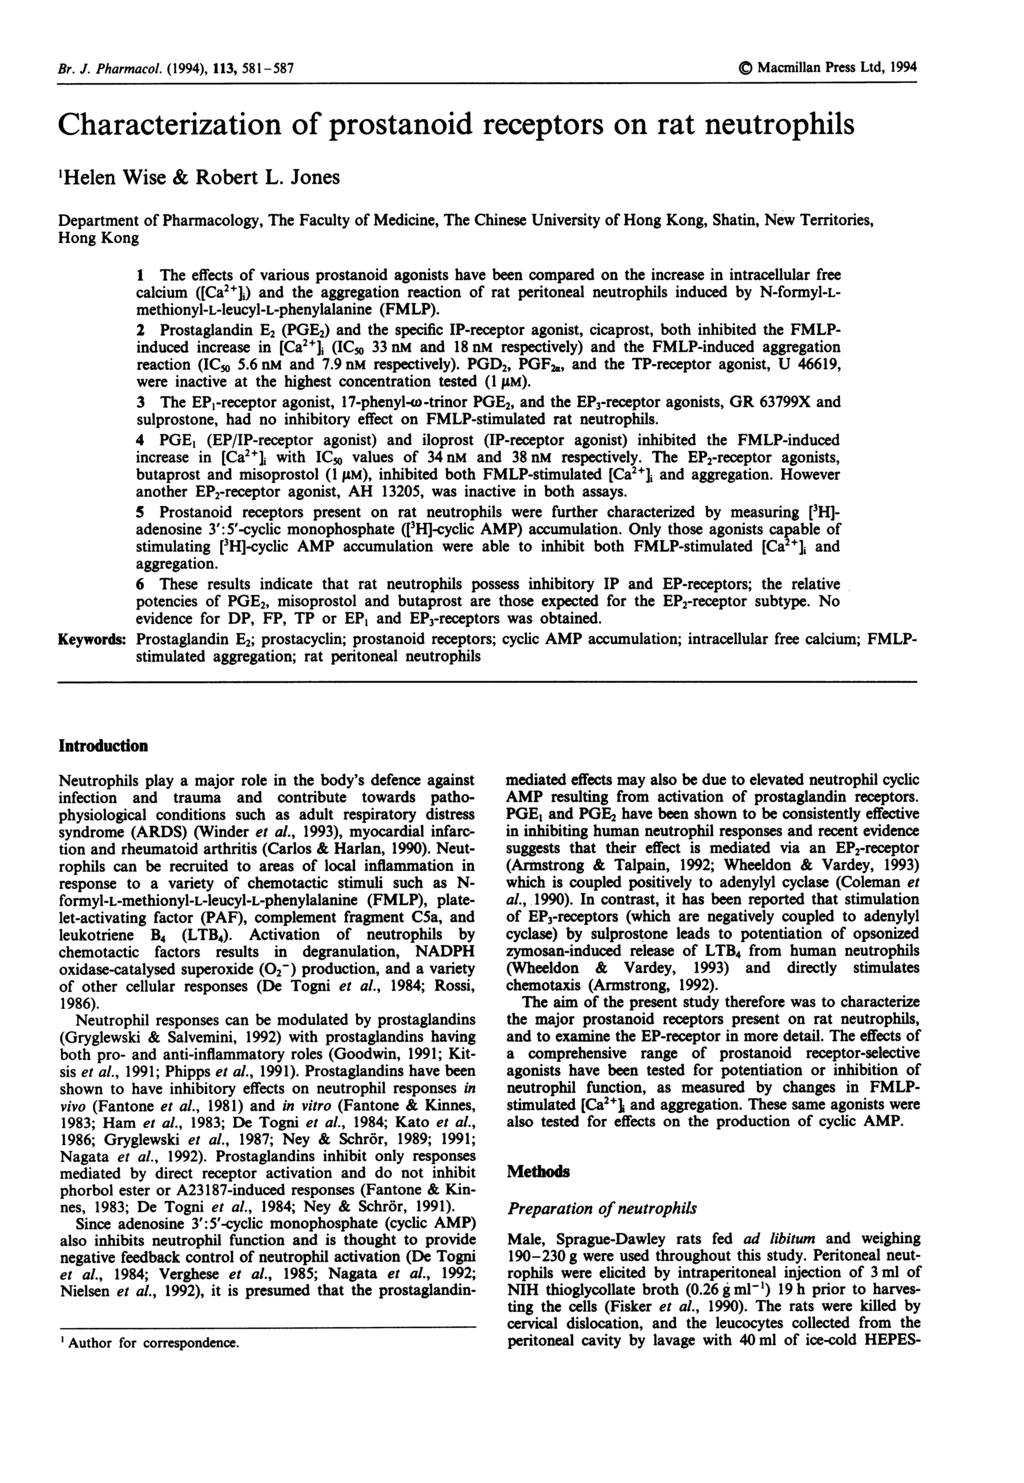 Br. J. Pharmaol. (1994), 113, 581-587 Preparation of neutrophils Male, Sprague-Dawley rats fed ad libitum and weighing 19-23 g were used throughout this study.